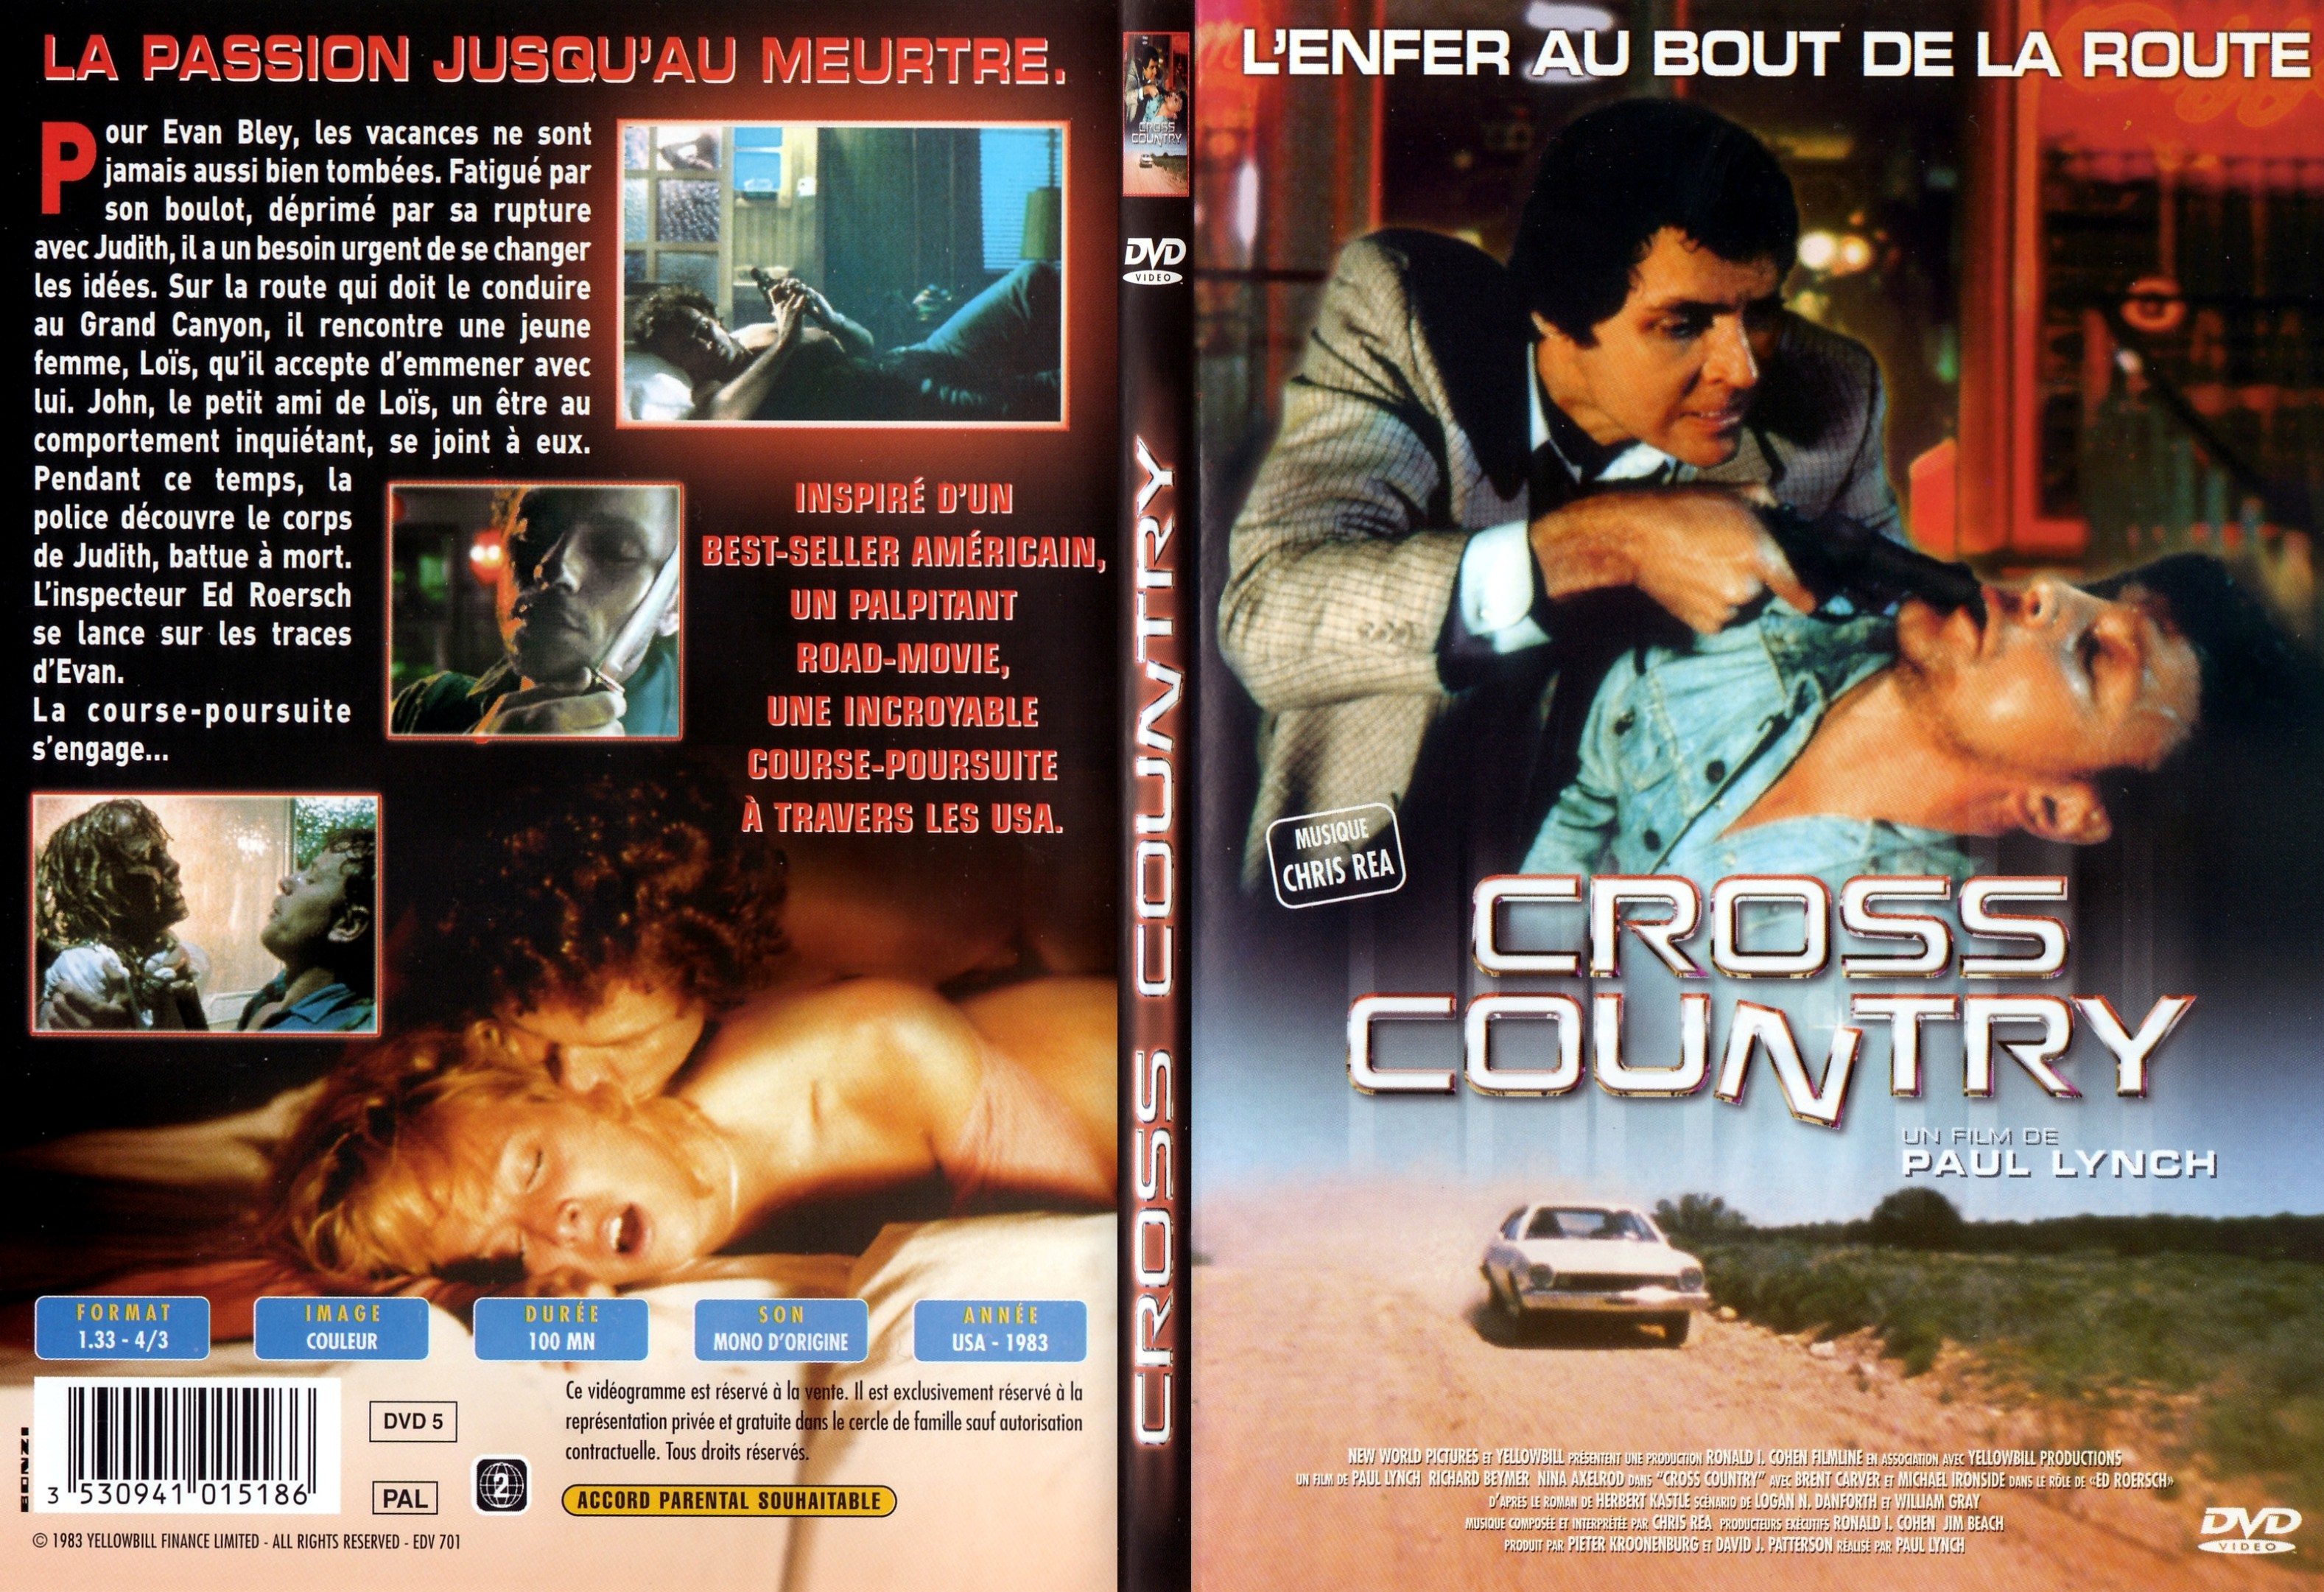 Jaquette DVD Cross country - SLIM